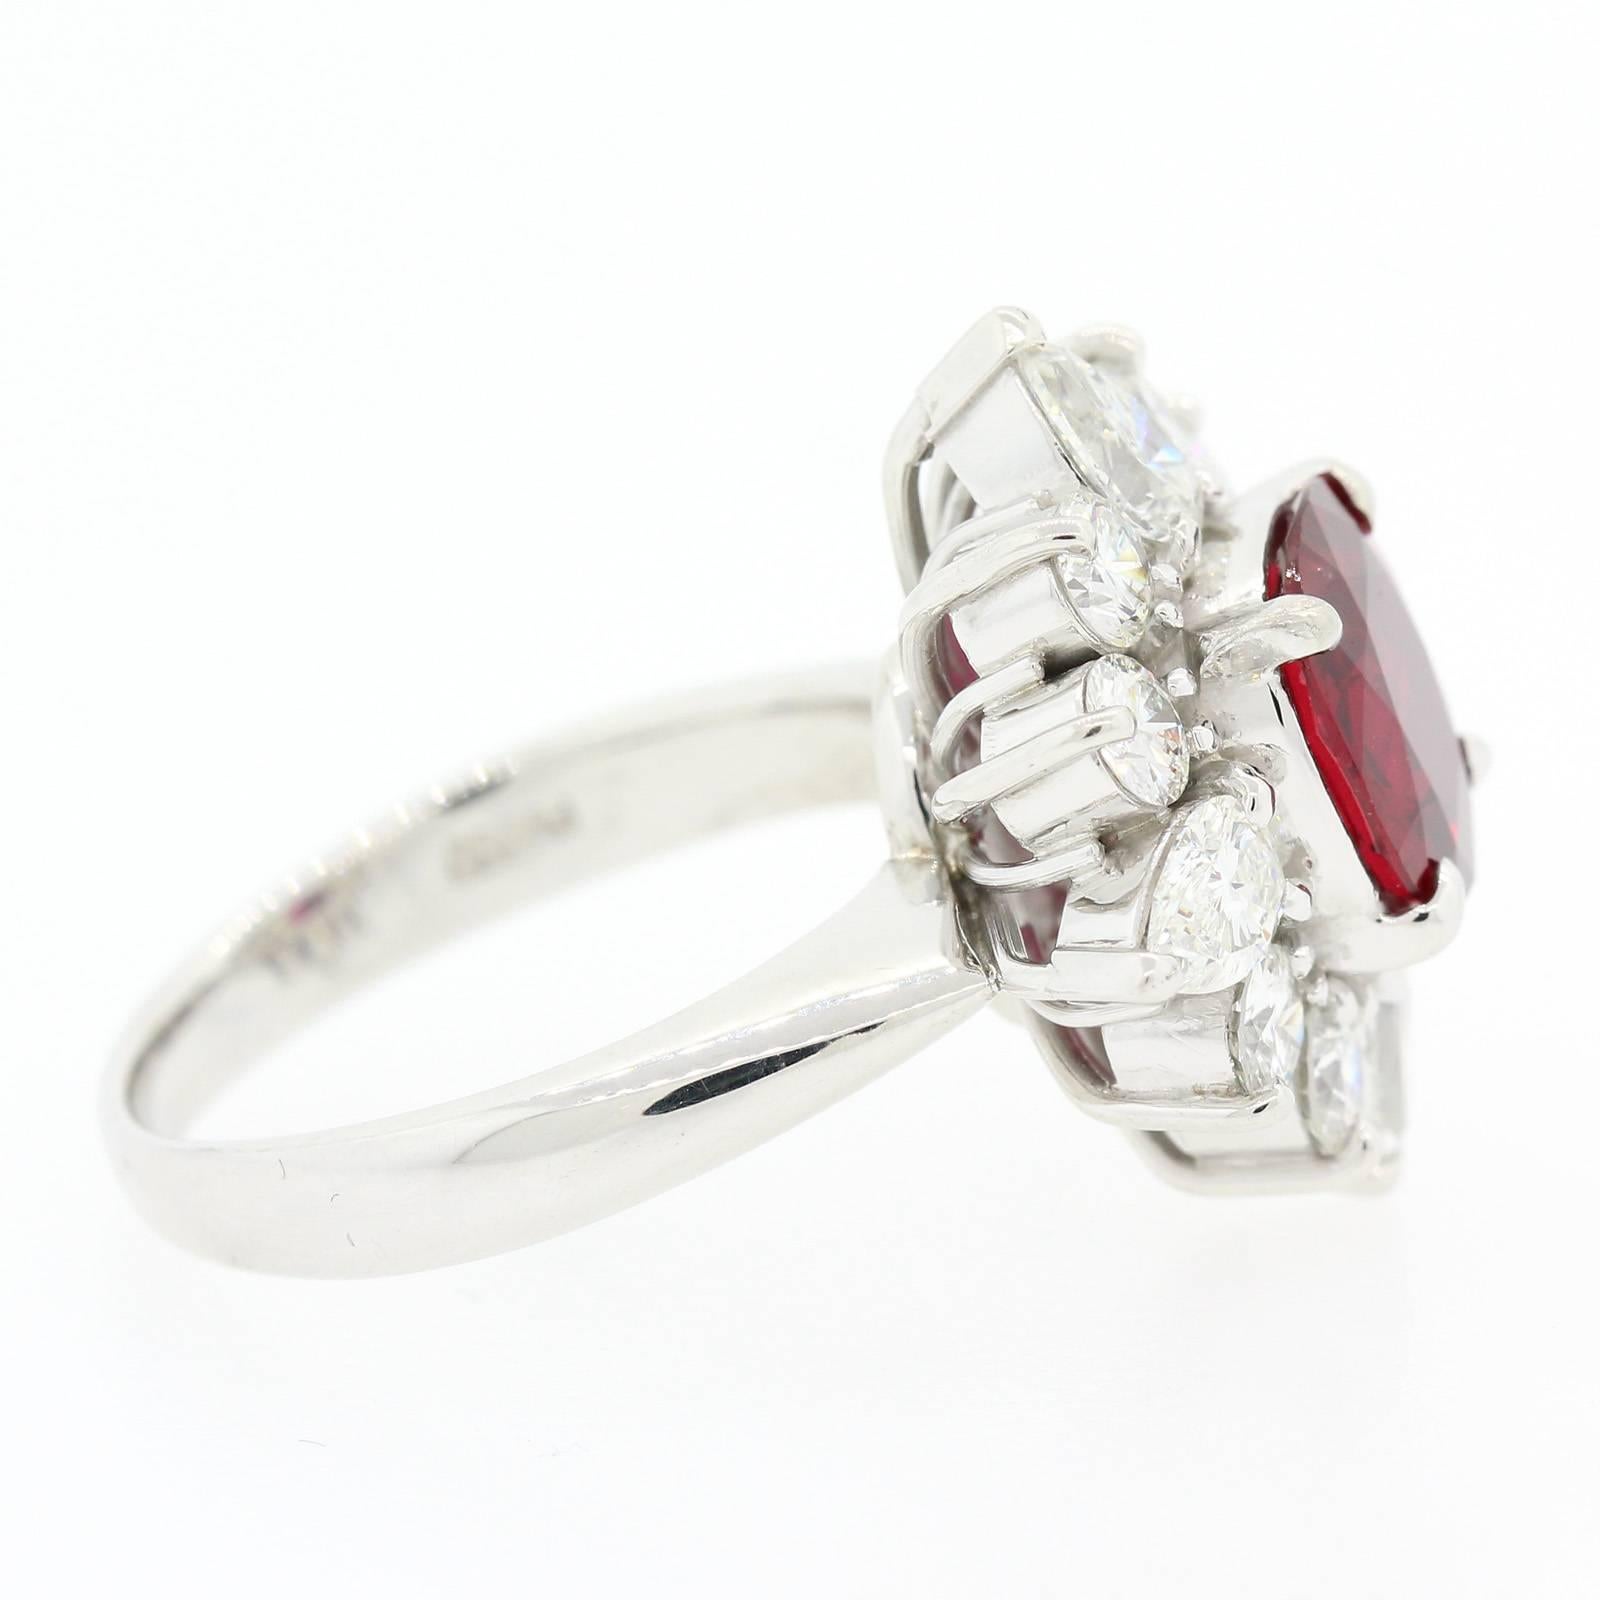 An luscious Ruby ring featuring a 2.15 carat Cushion Cut Ruby, G.I.A. certified  of Thai origin and heated.  The Ruby is surrounded by four Pear shape and eight Round Brilliant Cut Diamonds, all weighing 1.34 carat of H color - VS clarity.
Just